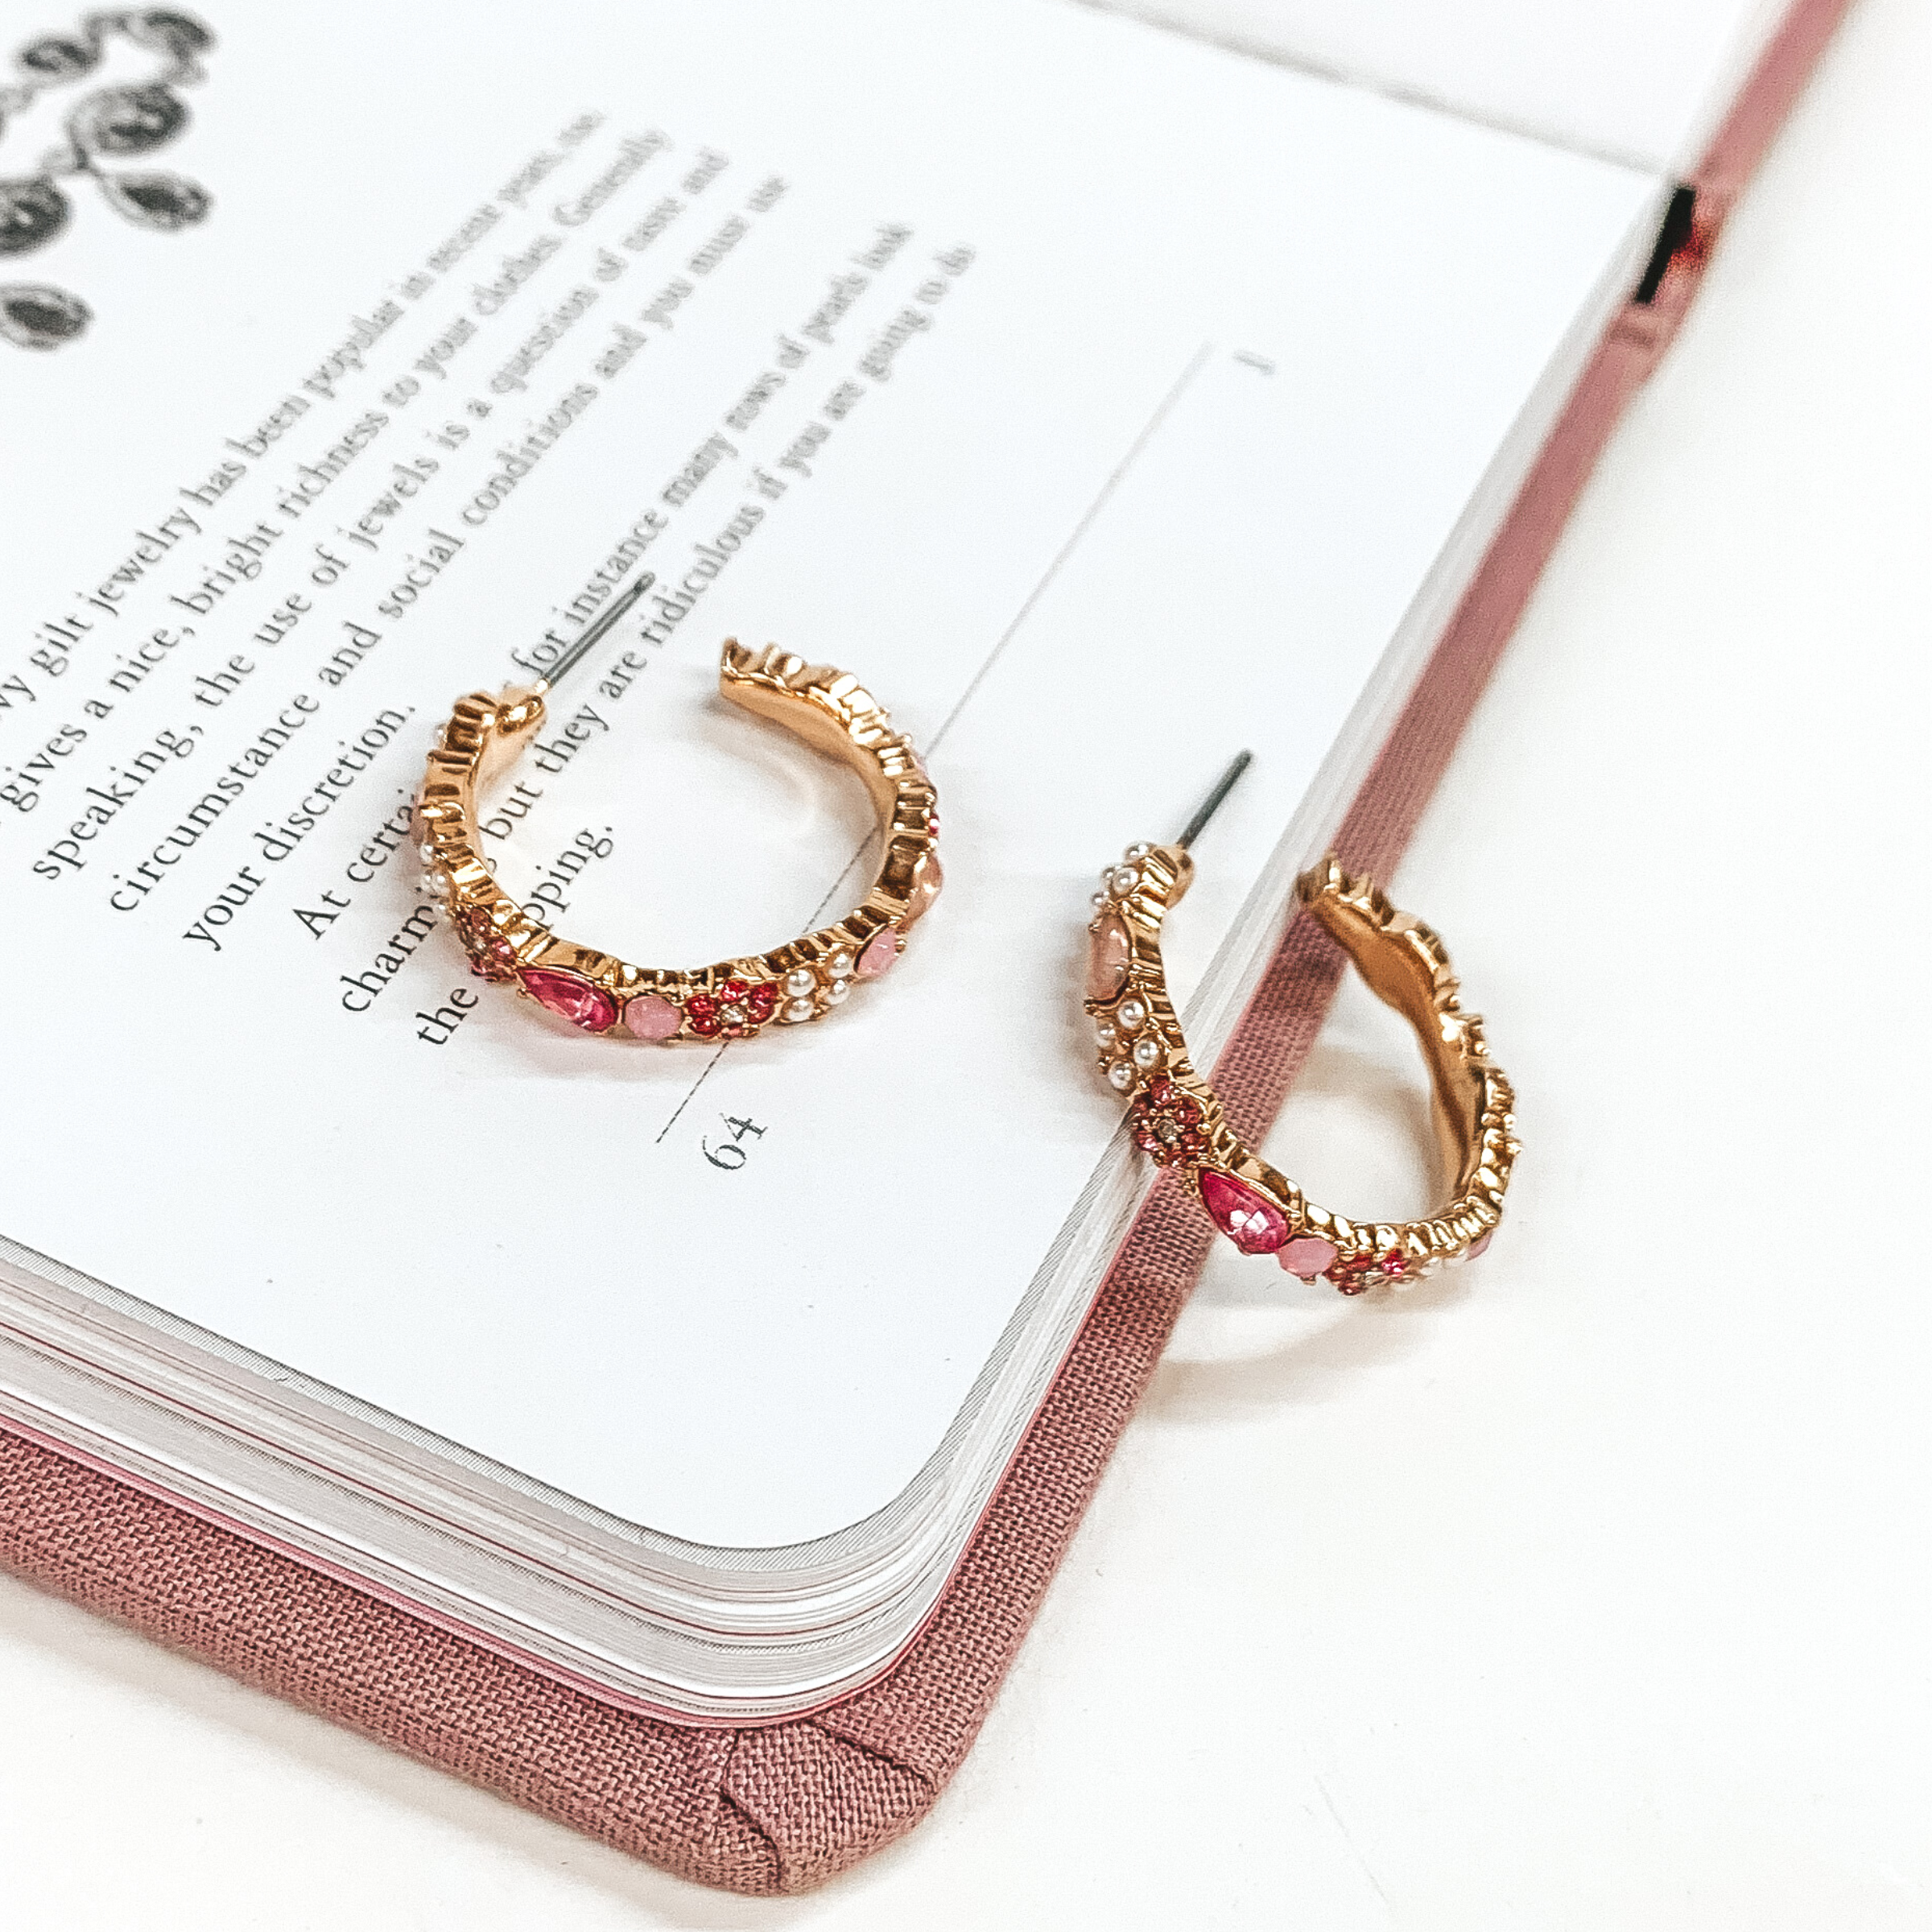 Gold Tone Hoop Earrings with Pink Crystals - Giddy Up Glamour Boutique